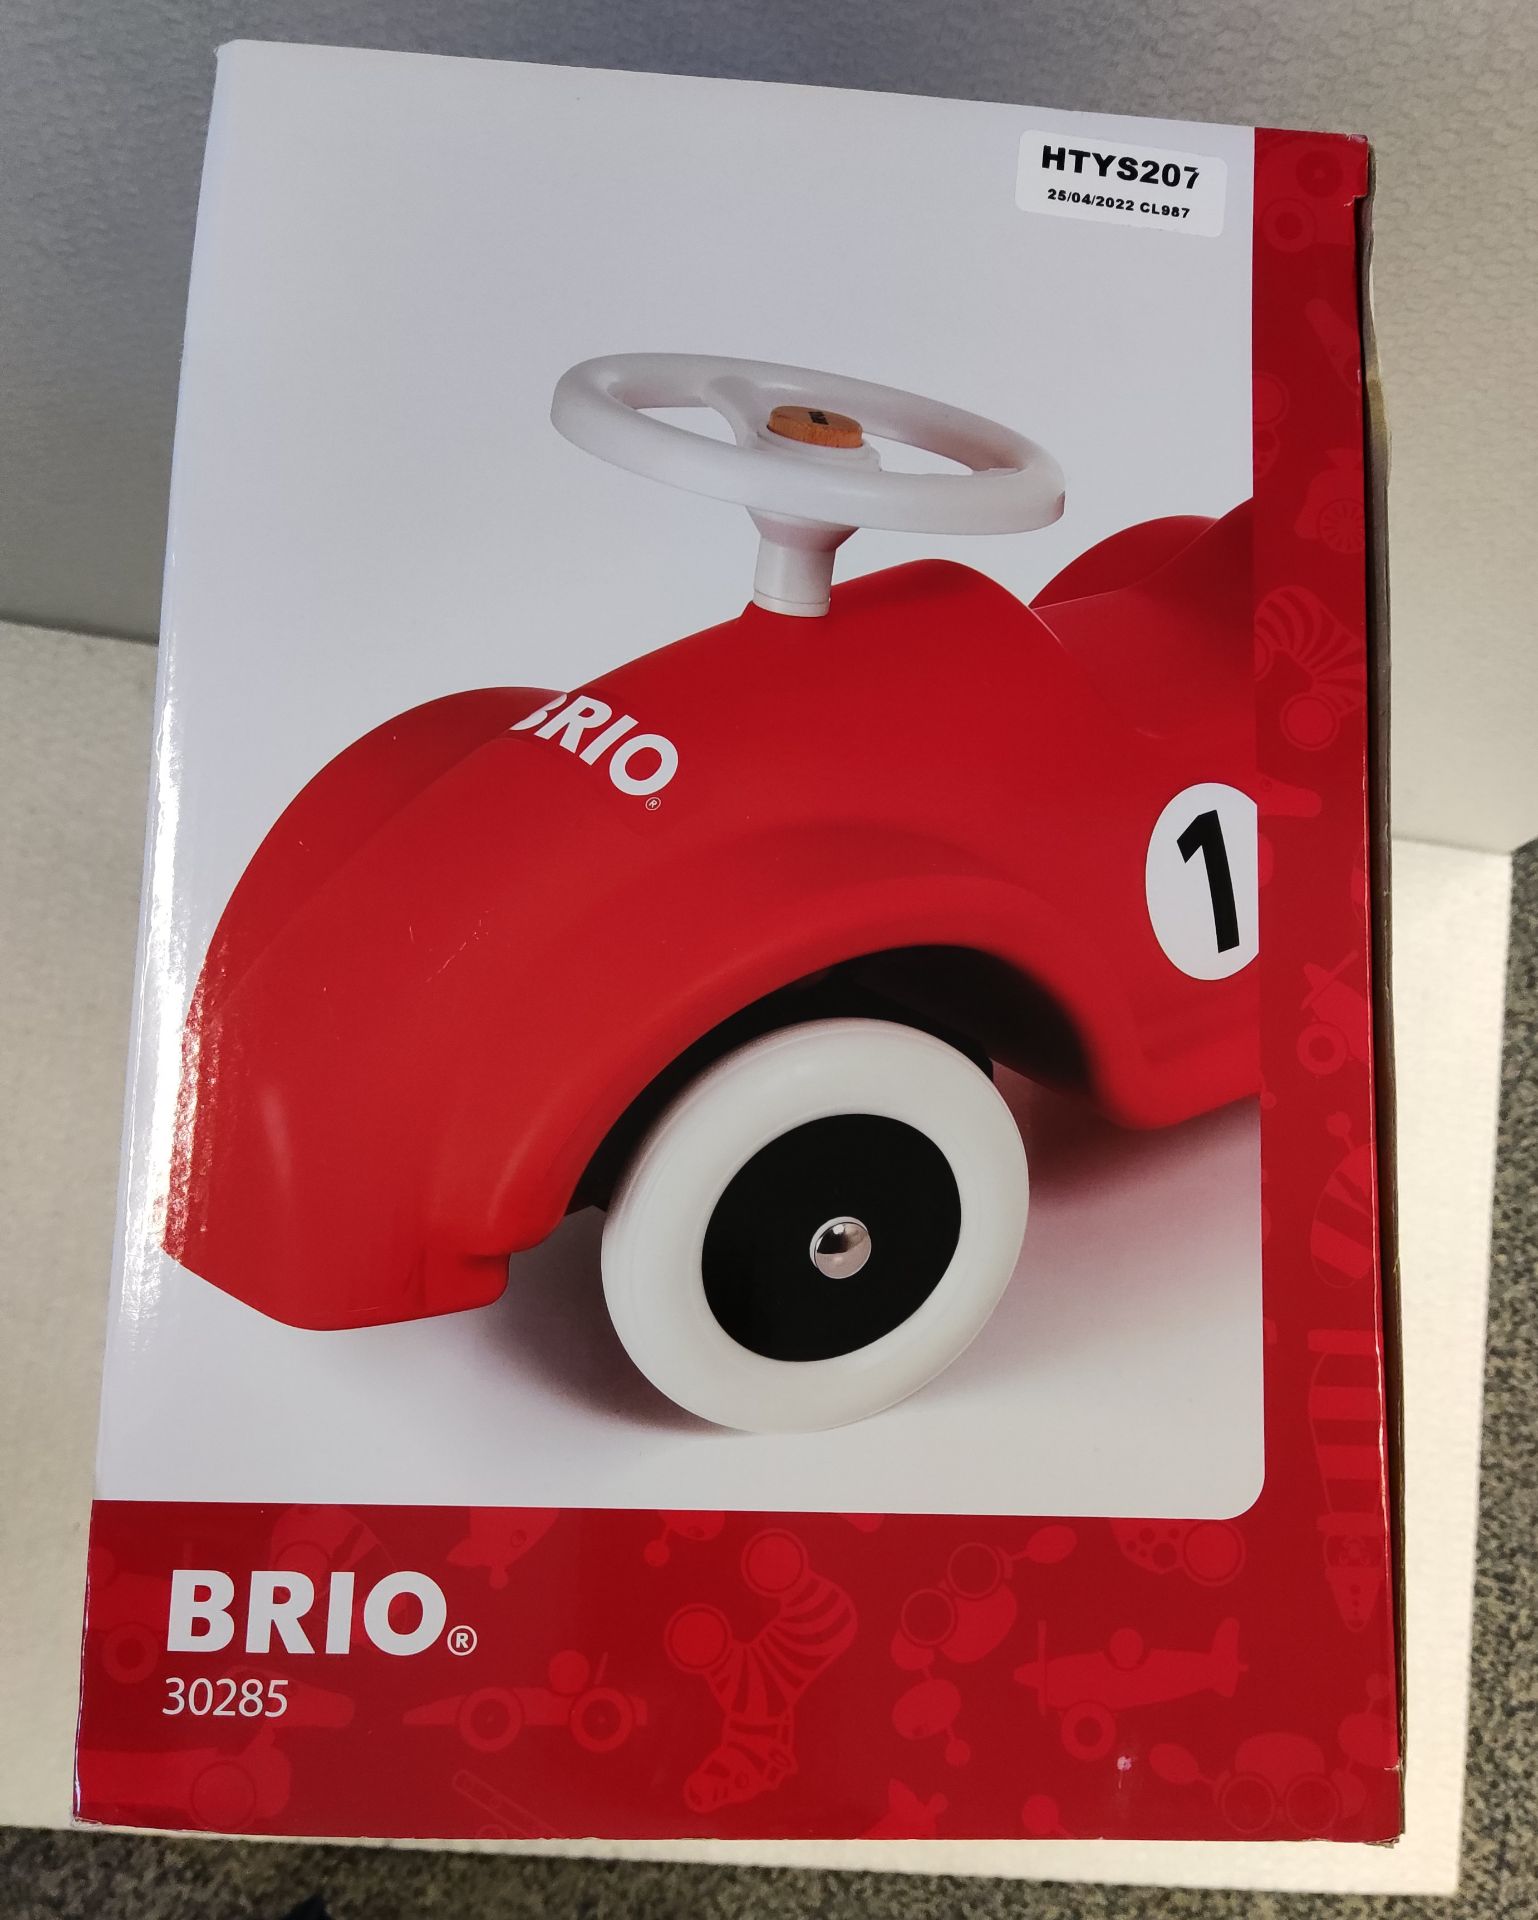 1 x Brio Ride On Race Car - Model 30285 - New/Boxed - Image 8 of 8